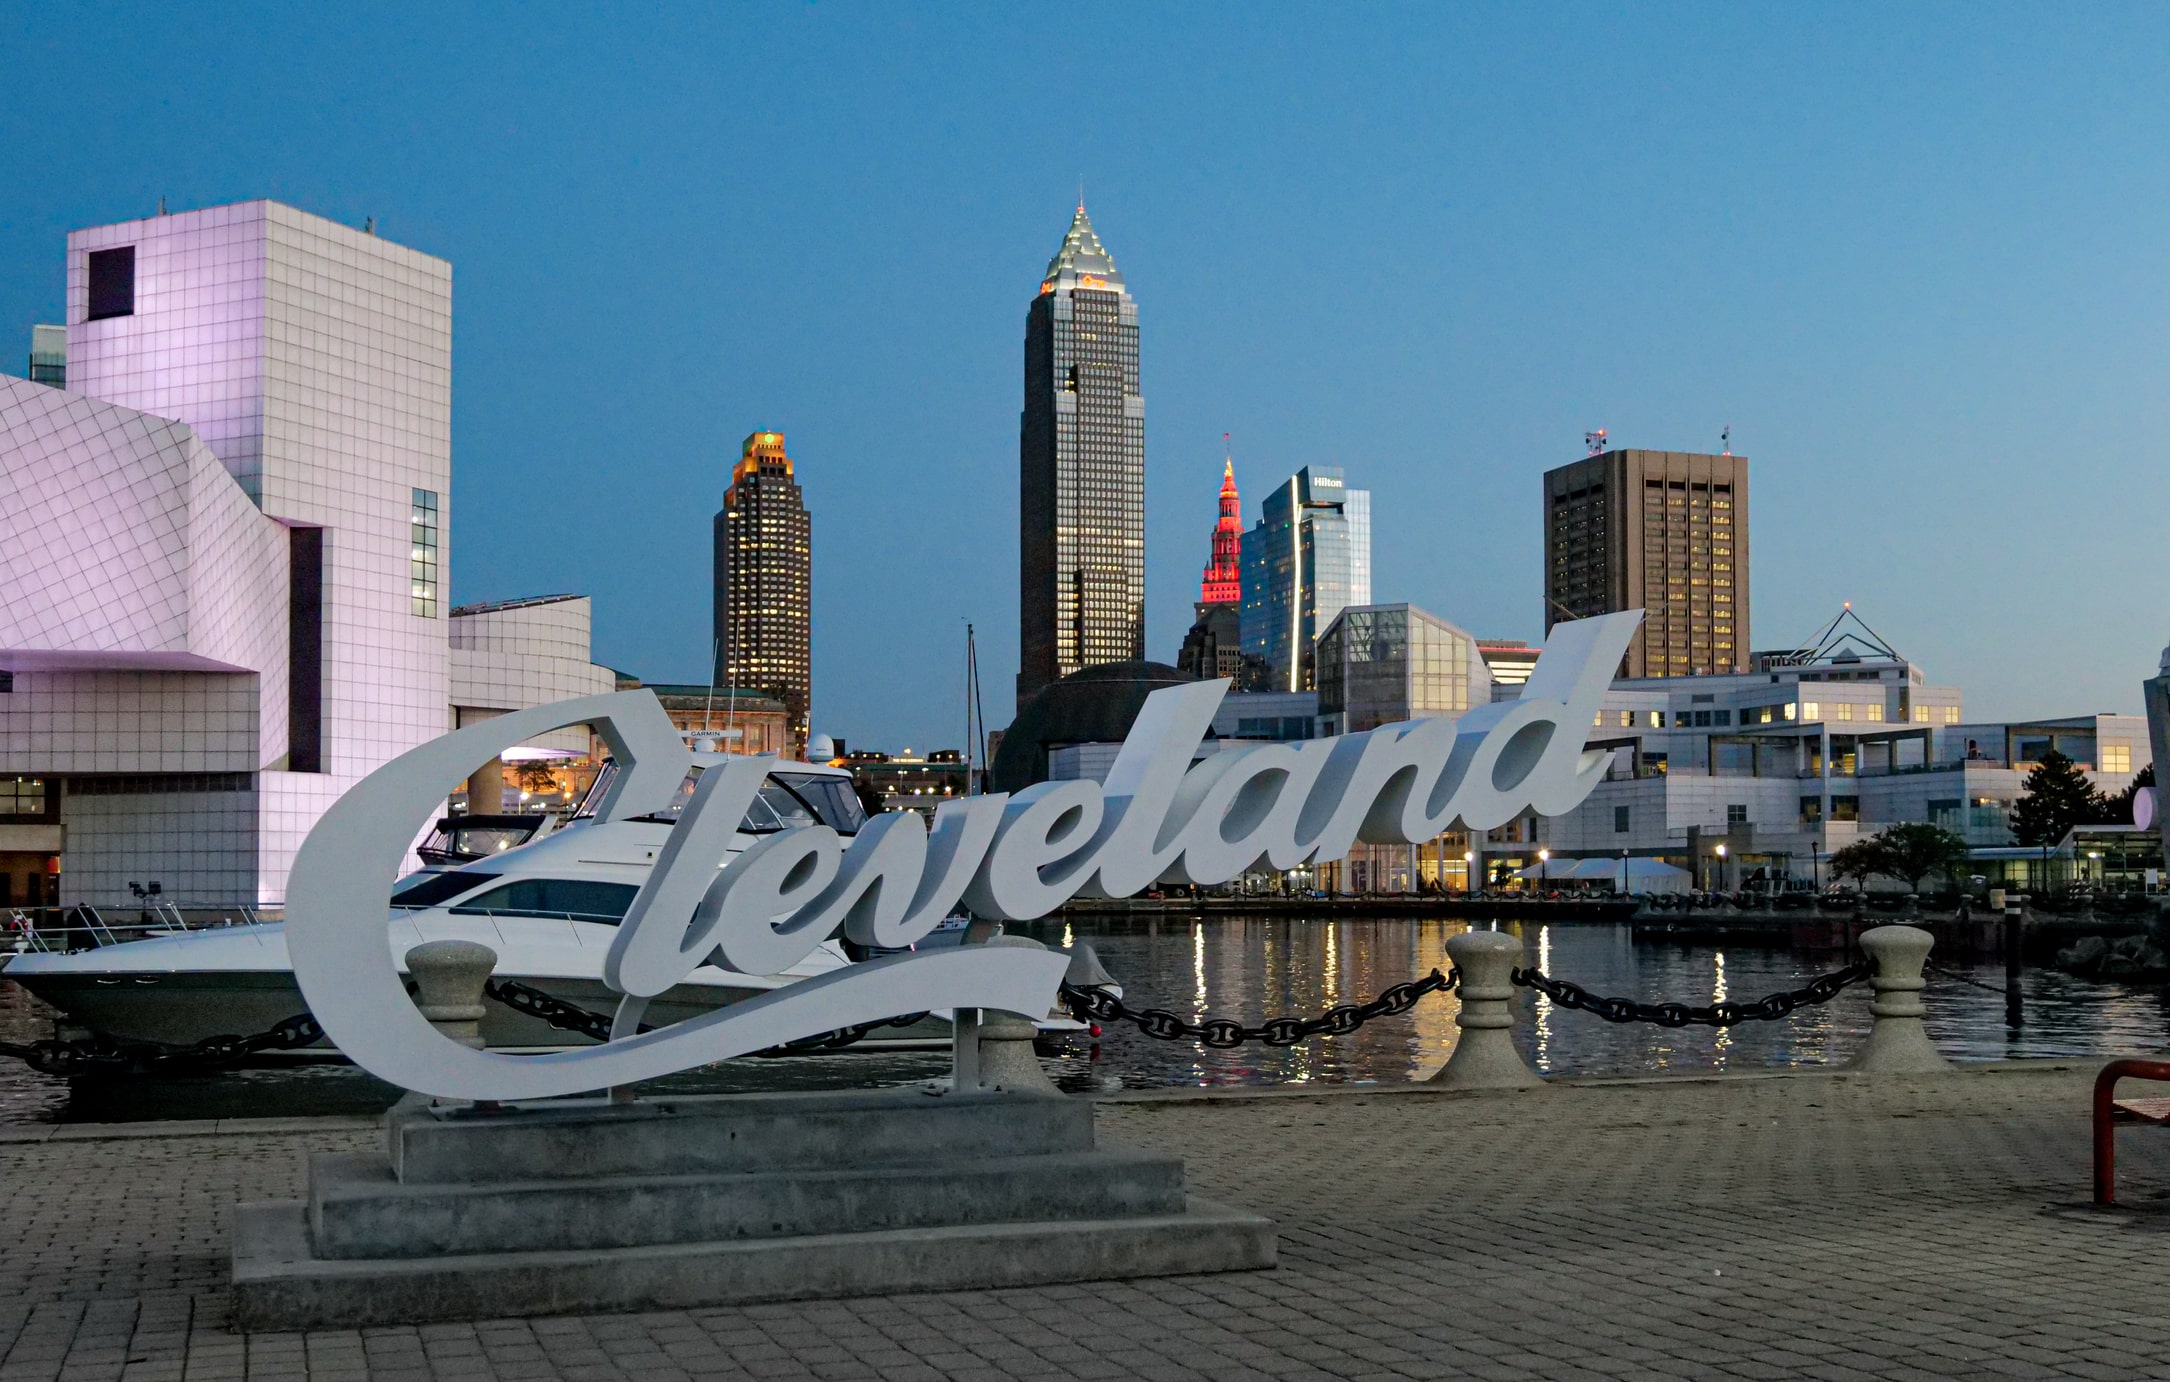 Cleveland Ohio logo in front of the cityscape